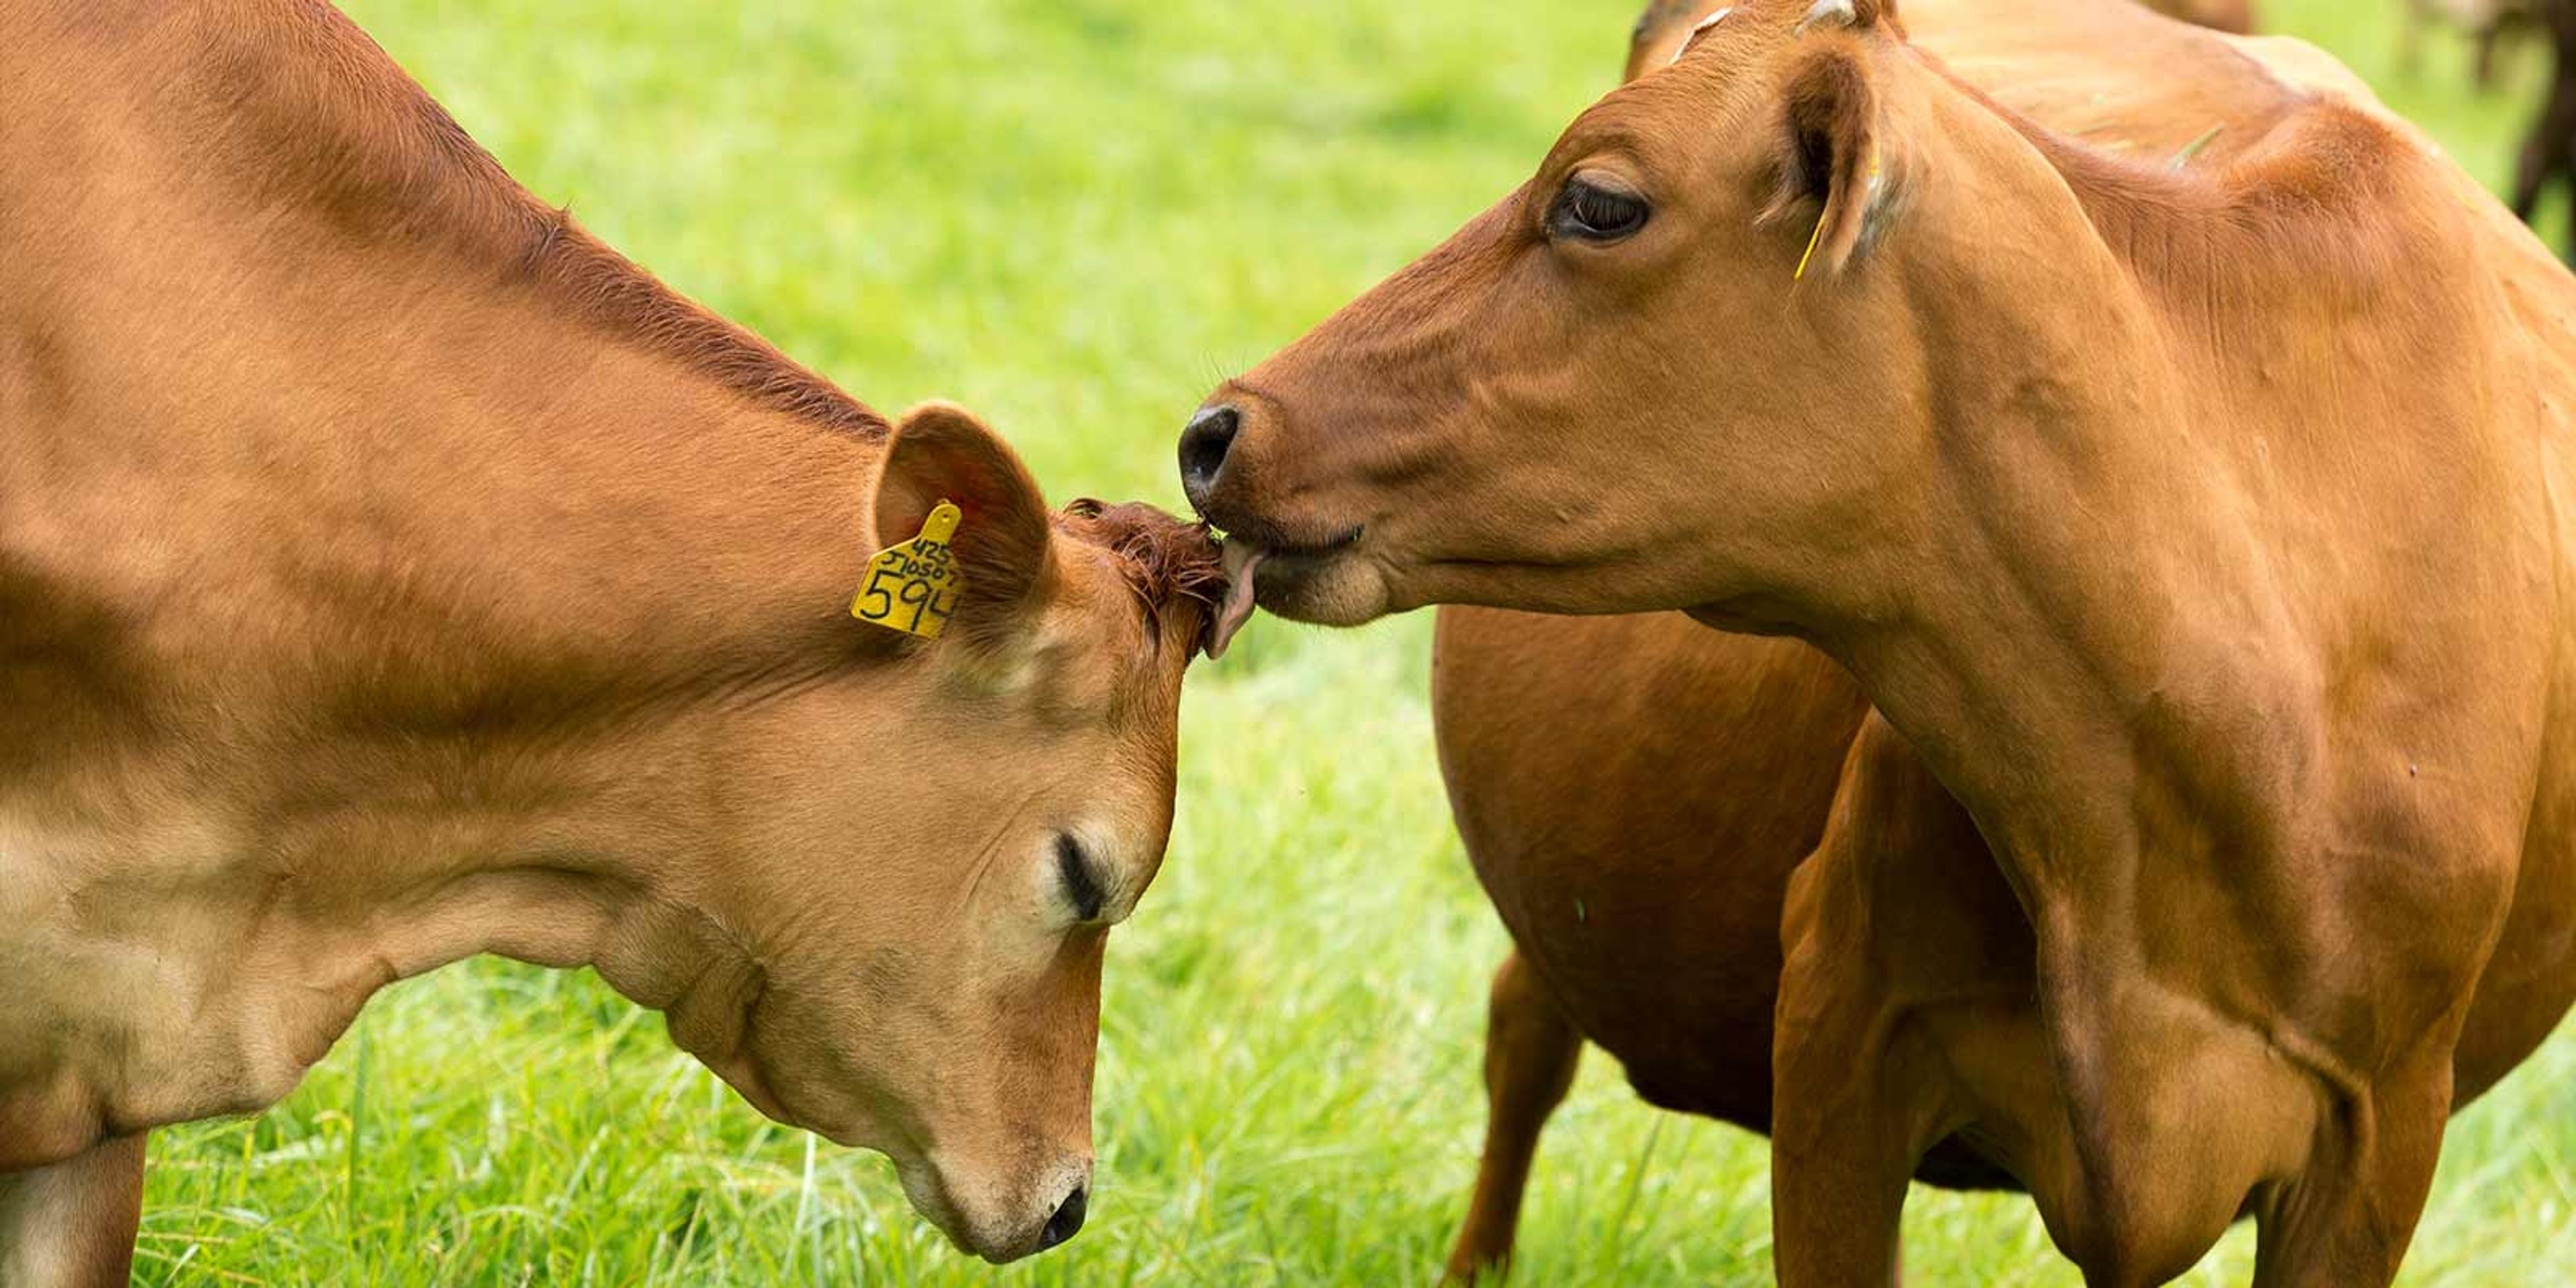 Out in a pasture, one tan cow licks the head of another cow and the second cow closes its eyes.